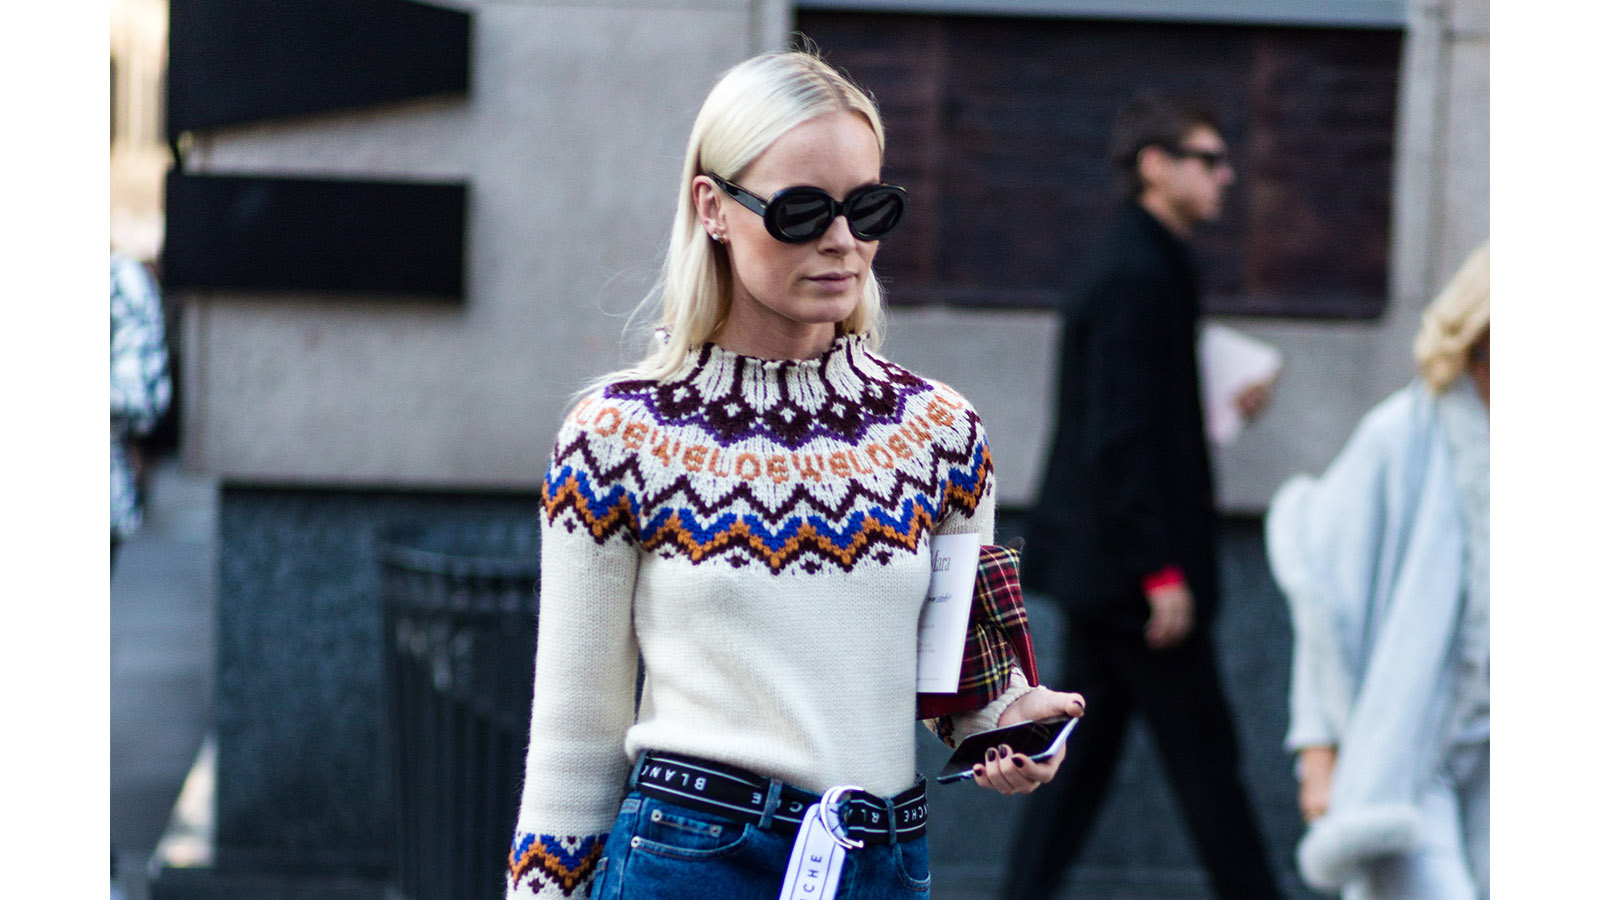 The Christmas jumpers you’ll actually want to wear